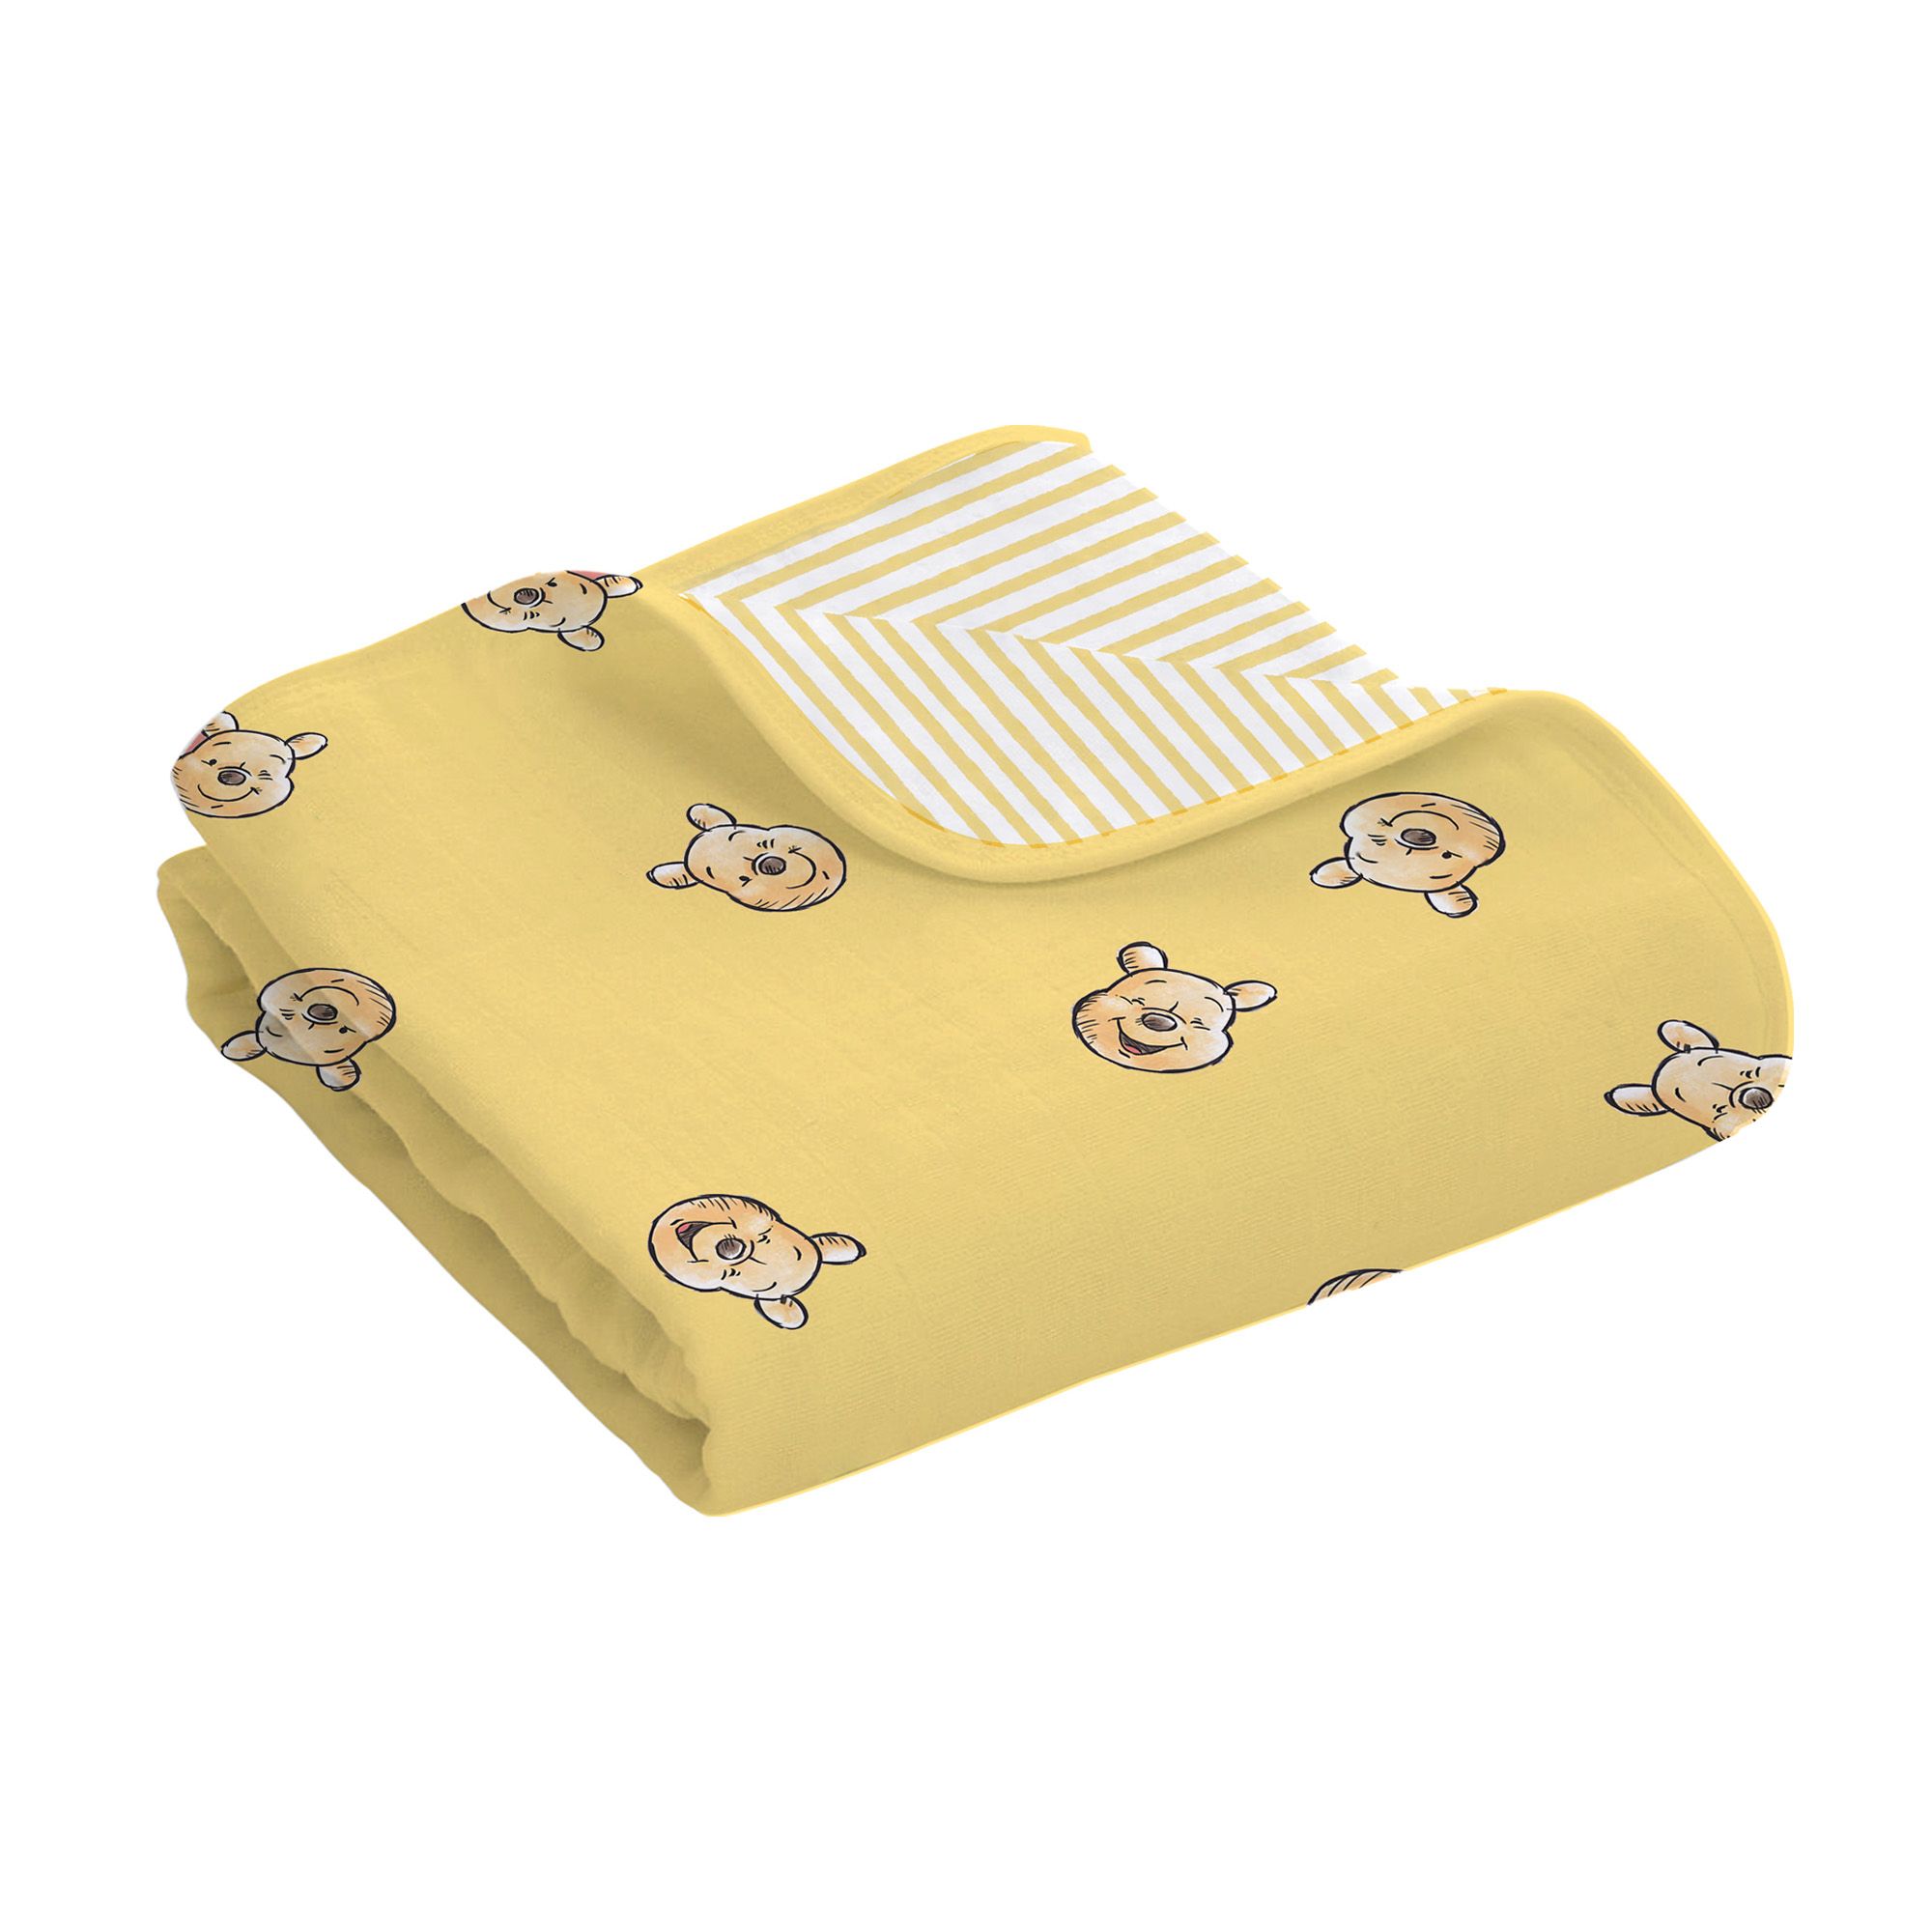 Let our high quality muslin assure you that you’re doing the best thing for your baby’s comfort. Superior breathability, natural give, softness and durability, this 100% cotton Muslin blanket is reversible which features a rotary print of Pooh's face overall on Yellow on one side and yellow and white stripped on the other side . Baby essentials which last a lifetime and provide happiness throughout generations! Breathable and soft muslin cozy fabric helps prevent overheating and is gentle against baby’s sensitive skin. Our large 100 x 150 cm blanket provides you and your little bundle of joy with enough space without having to fear that they will outgrow the blanket too soon

 This is an official Disney Winnie the Pooh merchandise, you can now pair it up with matching Duvet cover set, hooded towels, Fitted cot sheets and sleeping bags from the same collection.
This collection is verified by OEKO-TEX® and independently tested for harmful substances. It stands for customer confidence and high product safety. All our Cotton products are COGTS certified.